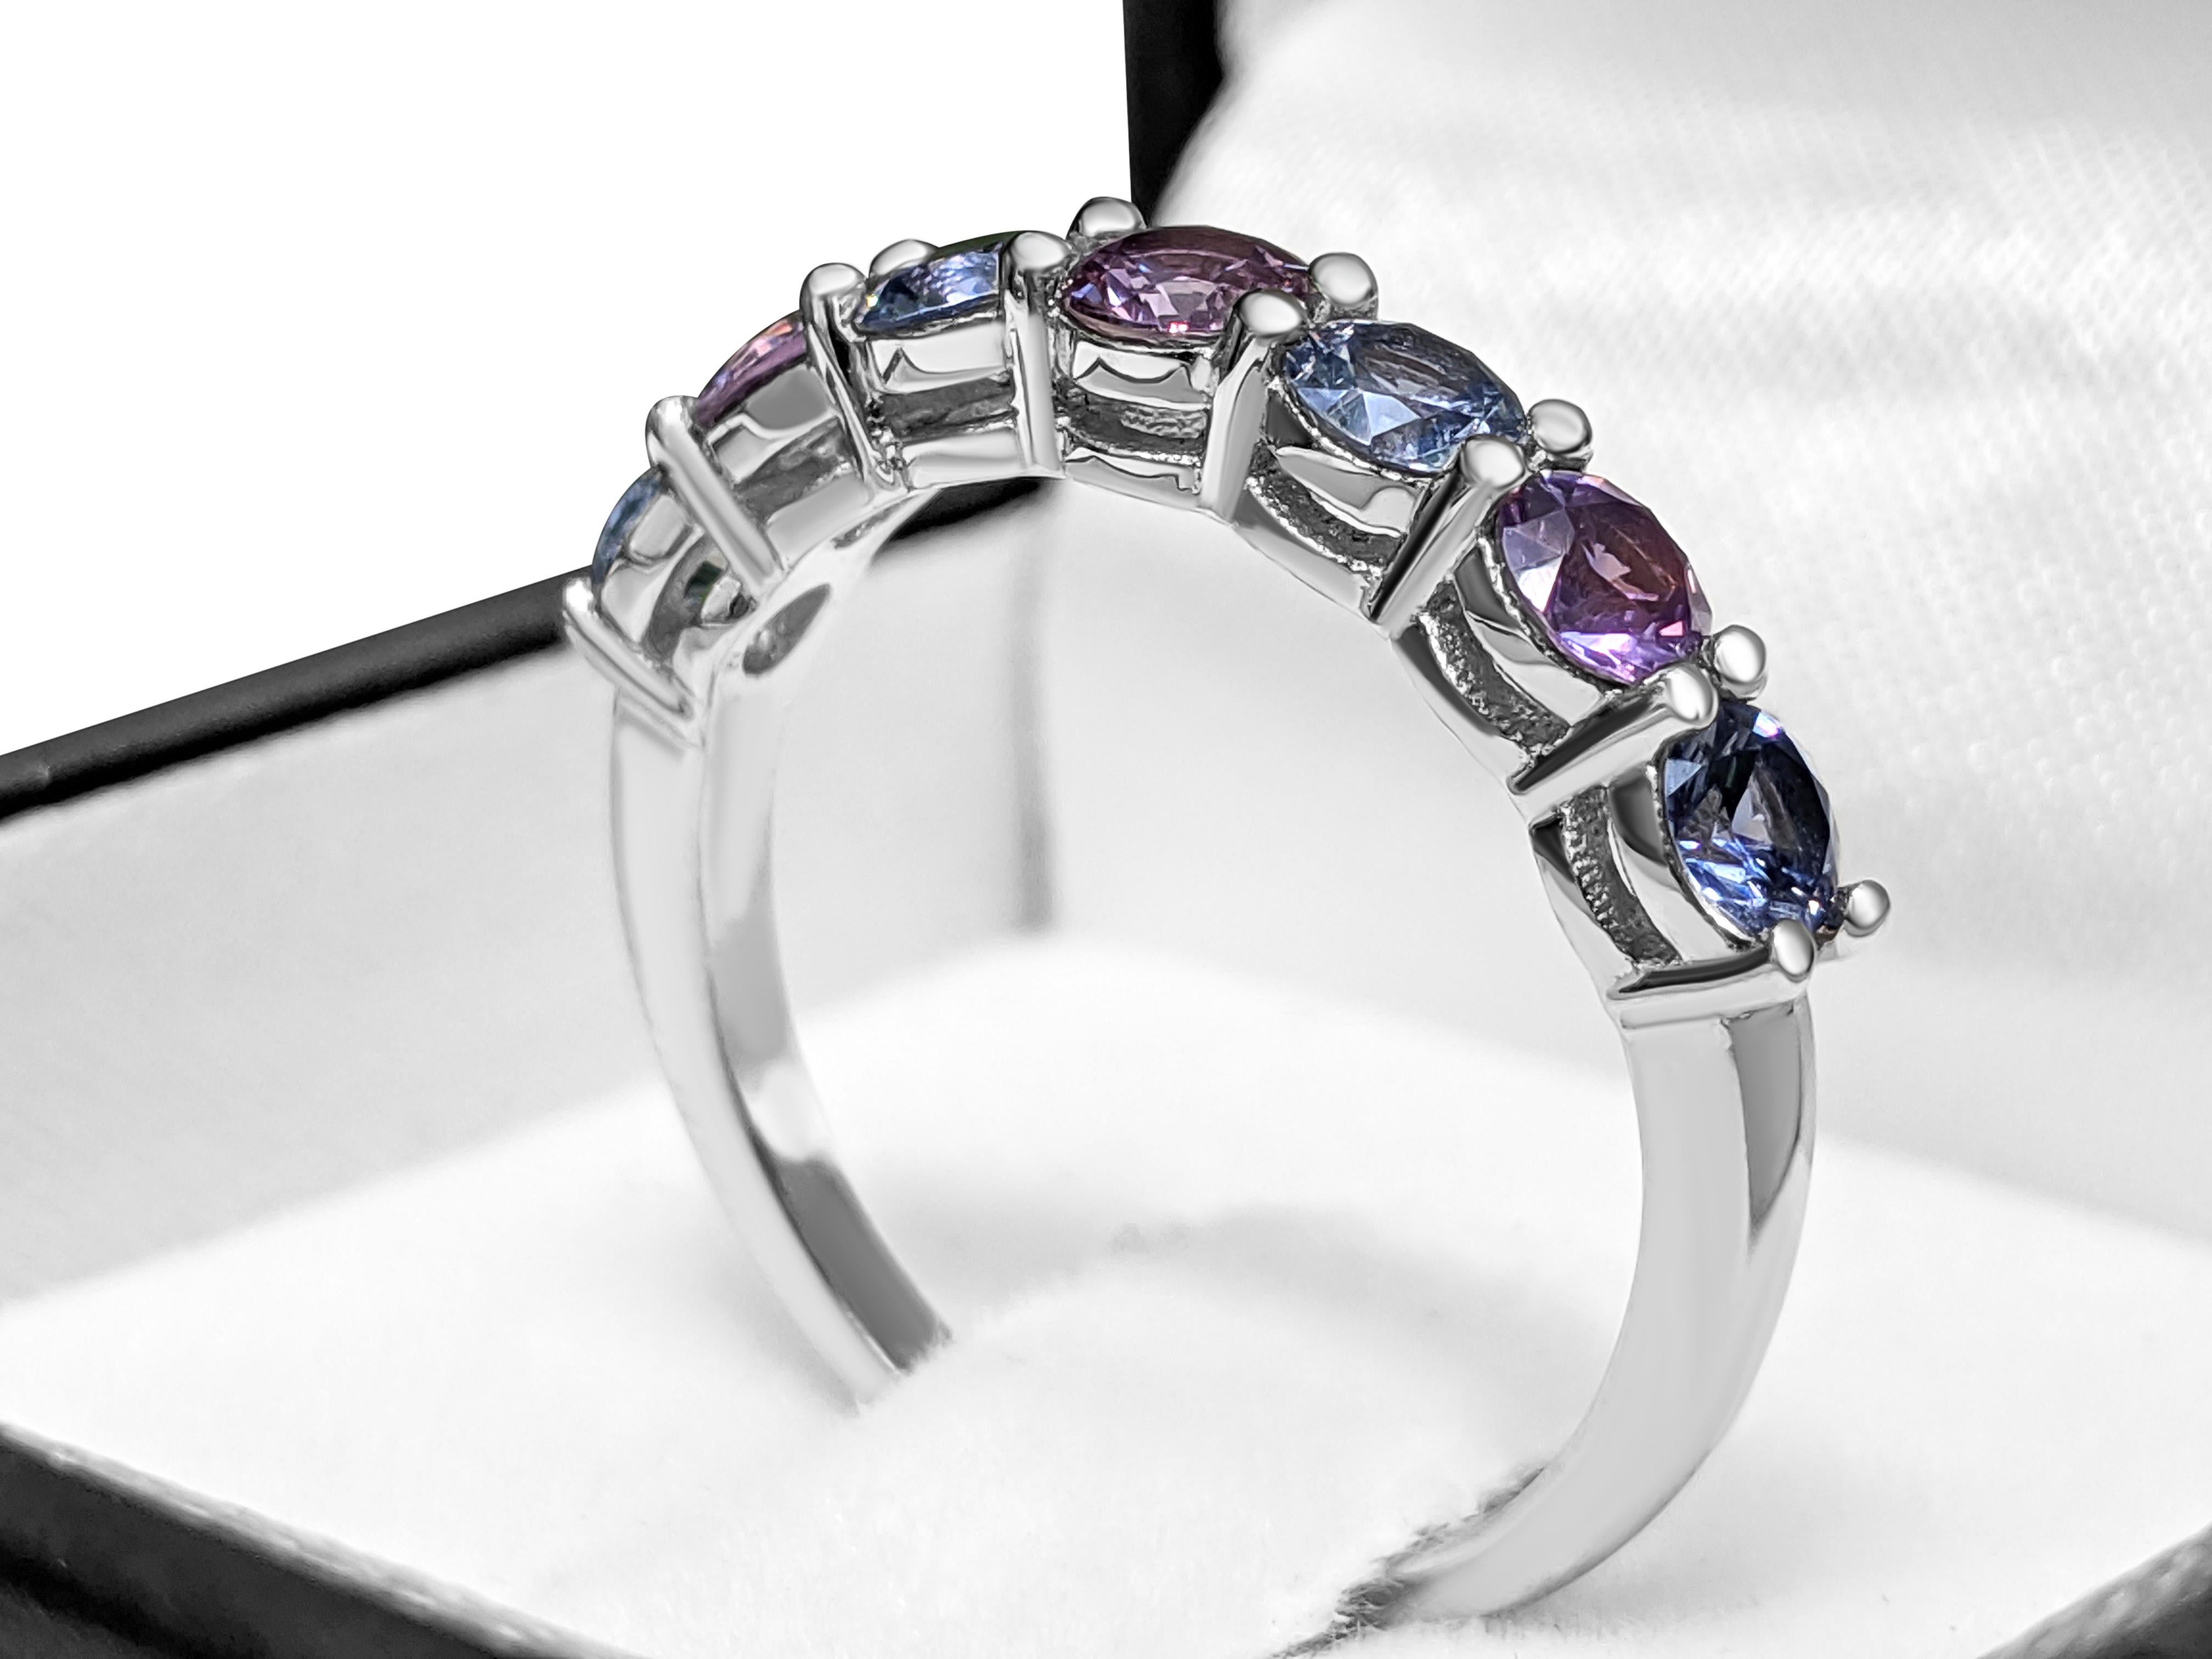 Round Cut $1 NO RESERVE! - 1.22cttw Sapphire 7 Stone Eternity Band - 14K White Gold Ring